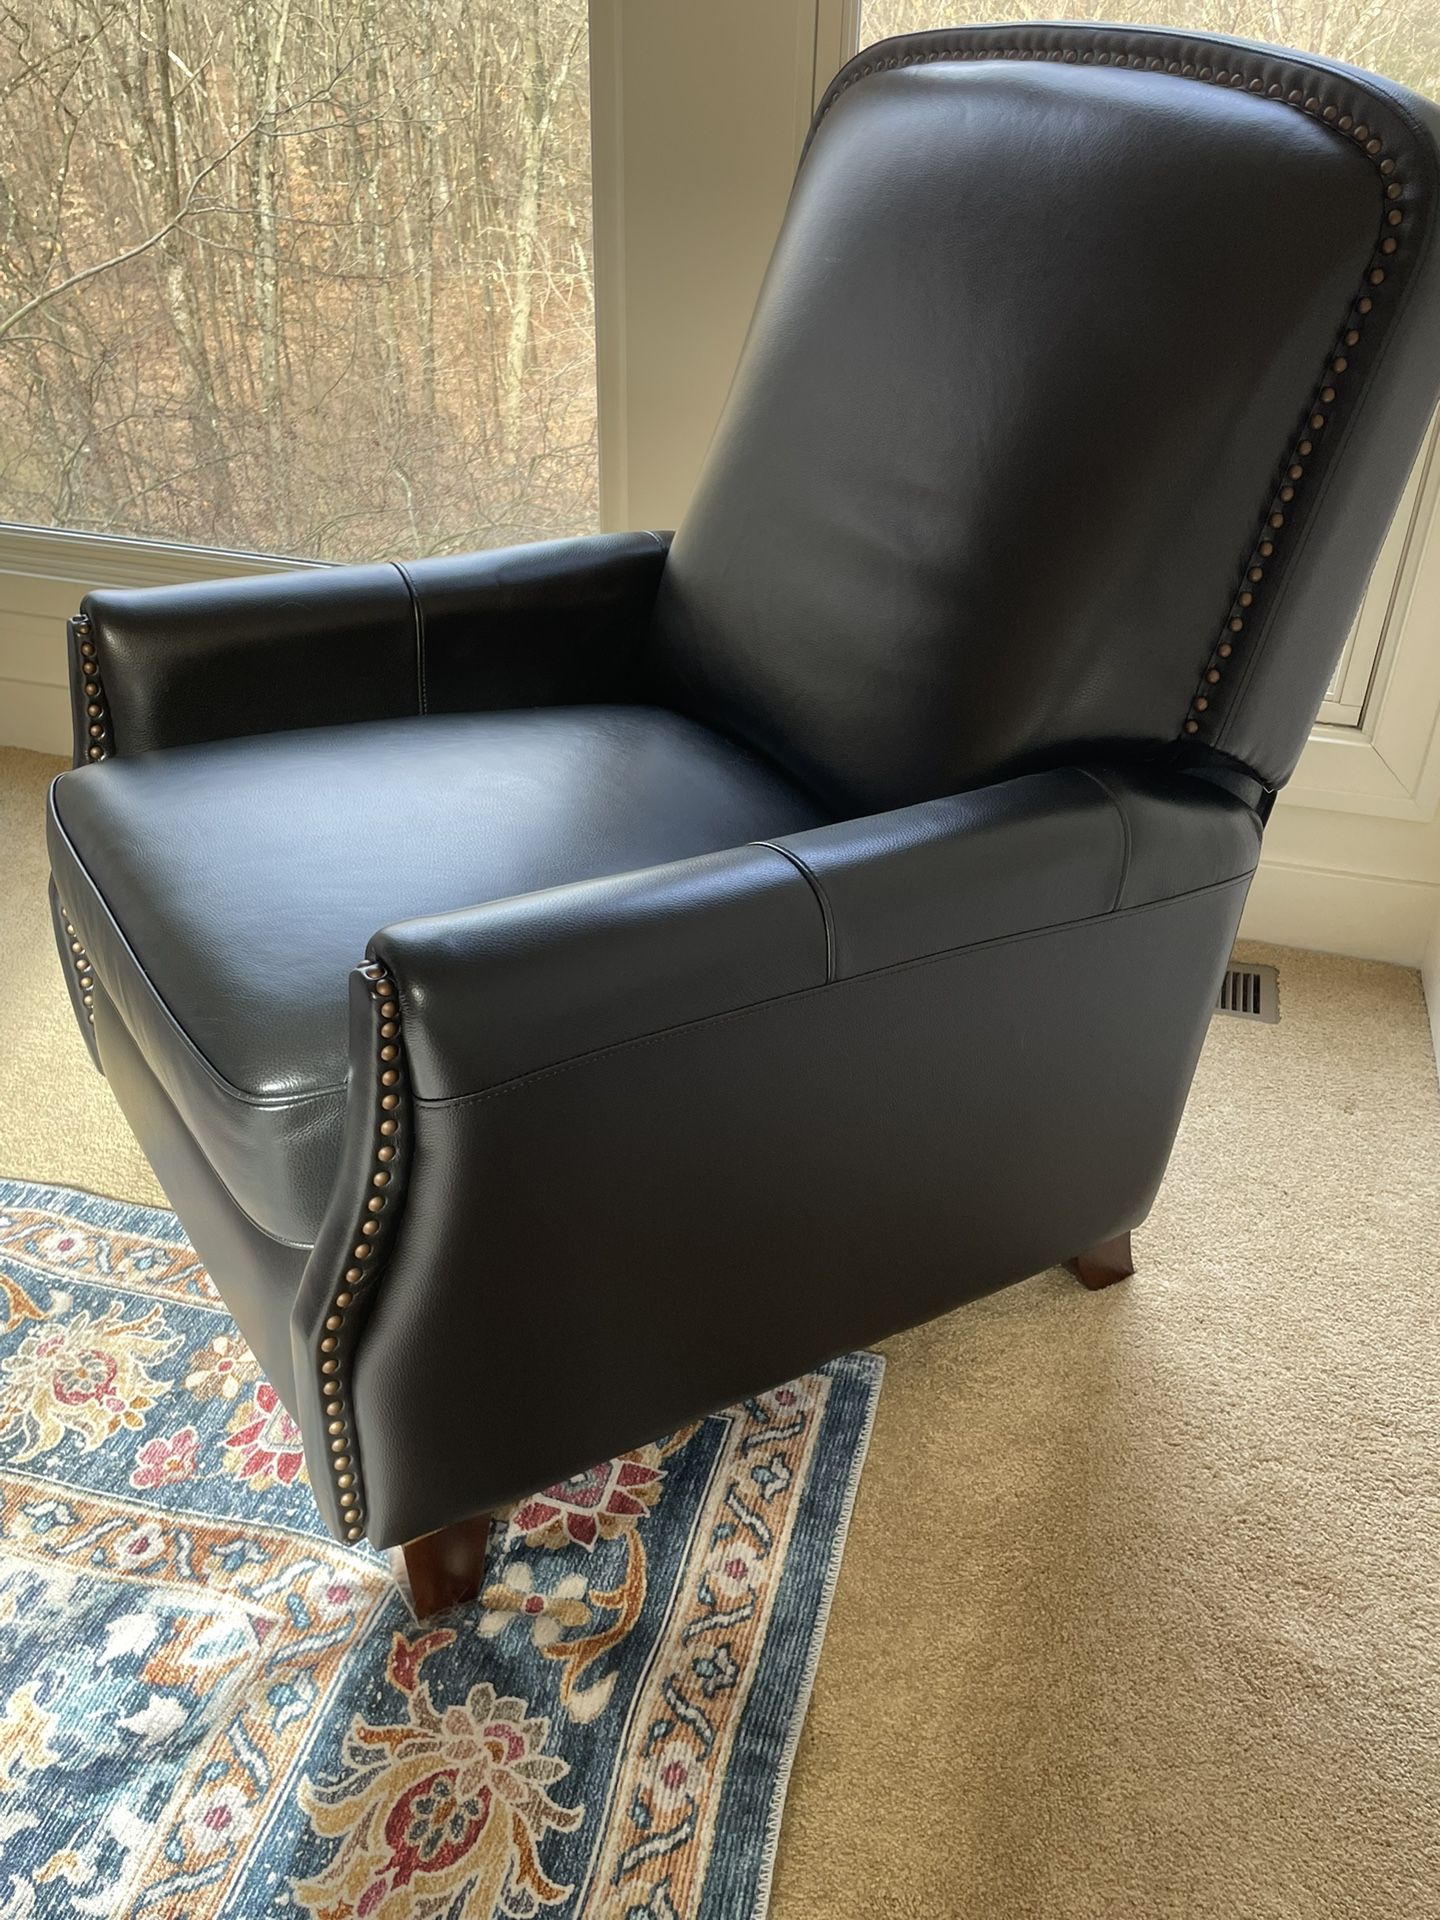 Brand New Leather Recliners (2)